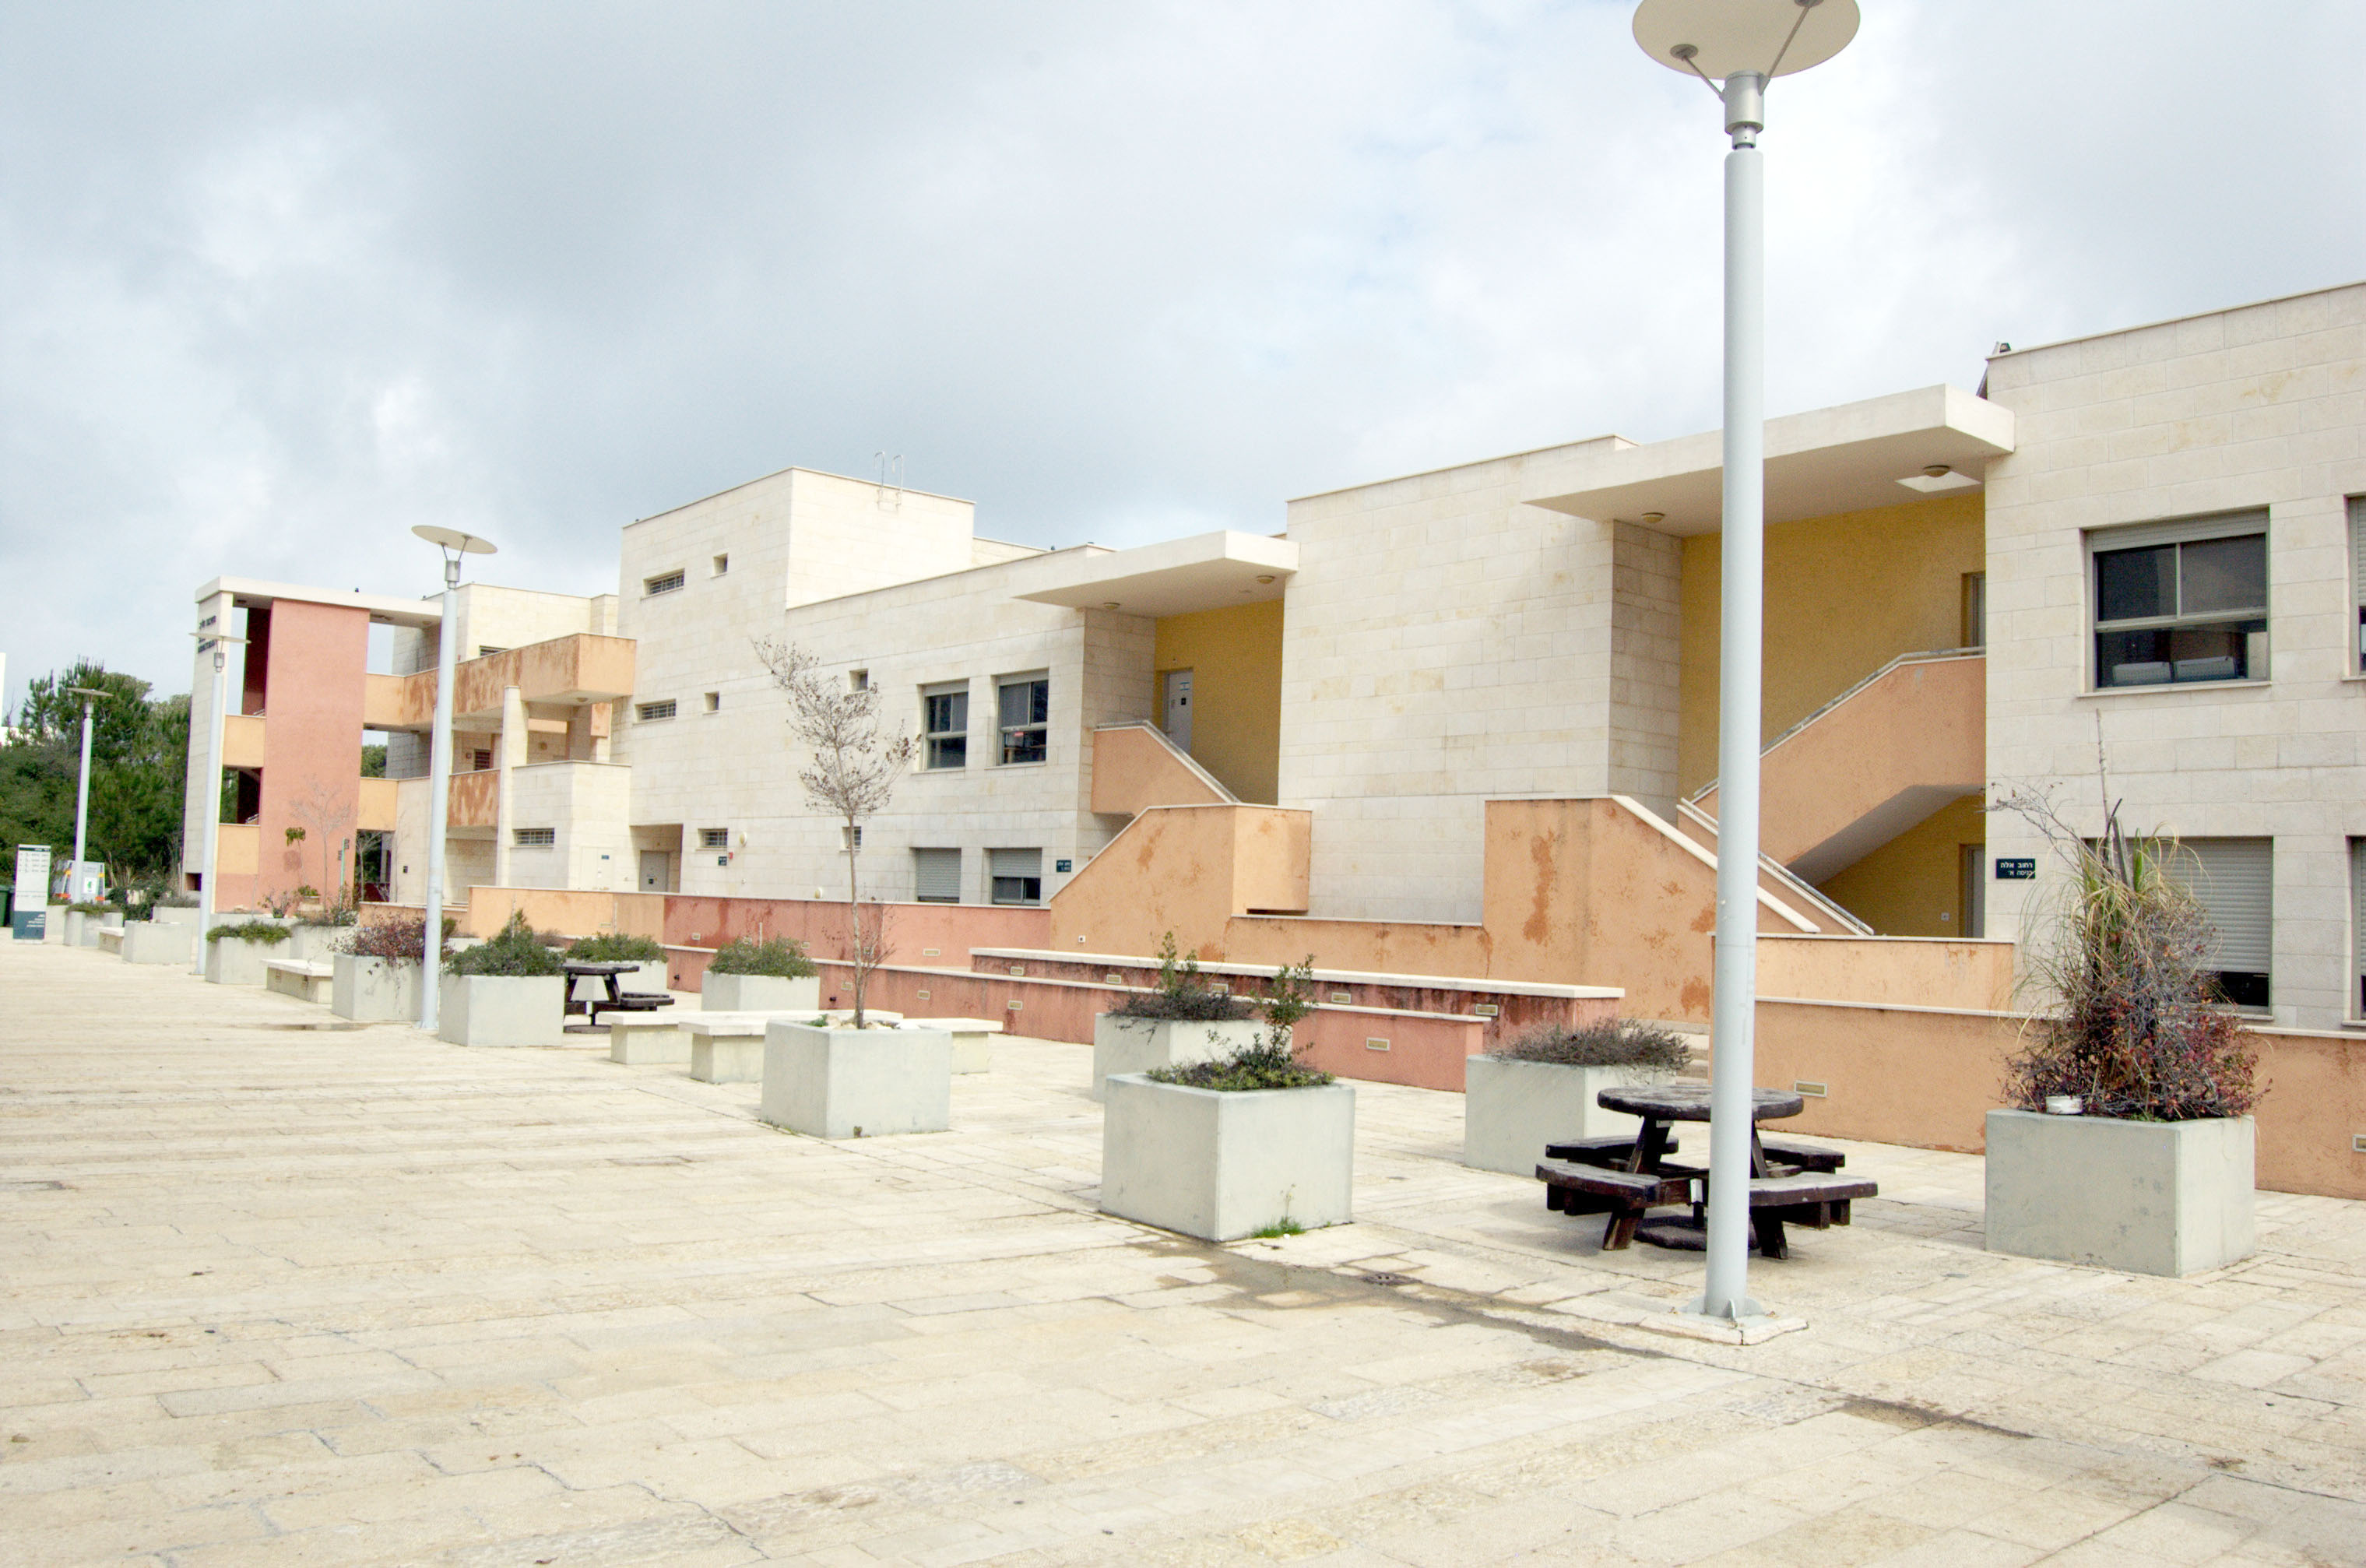 Exterior of student residence hall in Haifa, Israel.